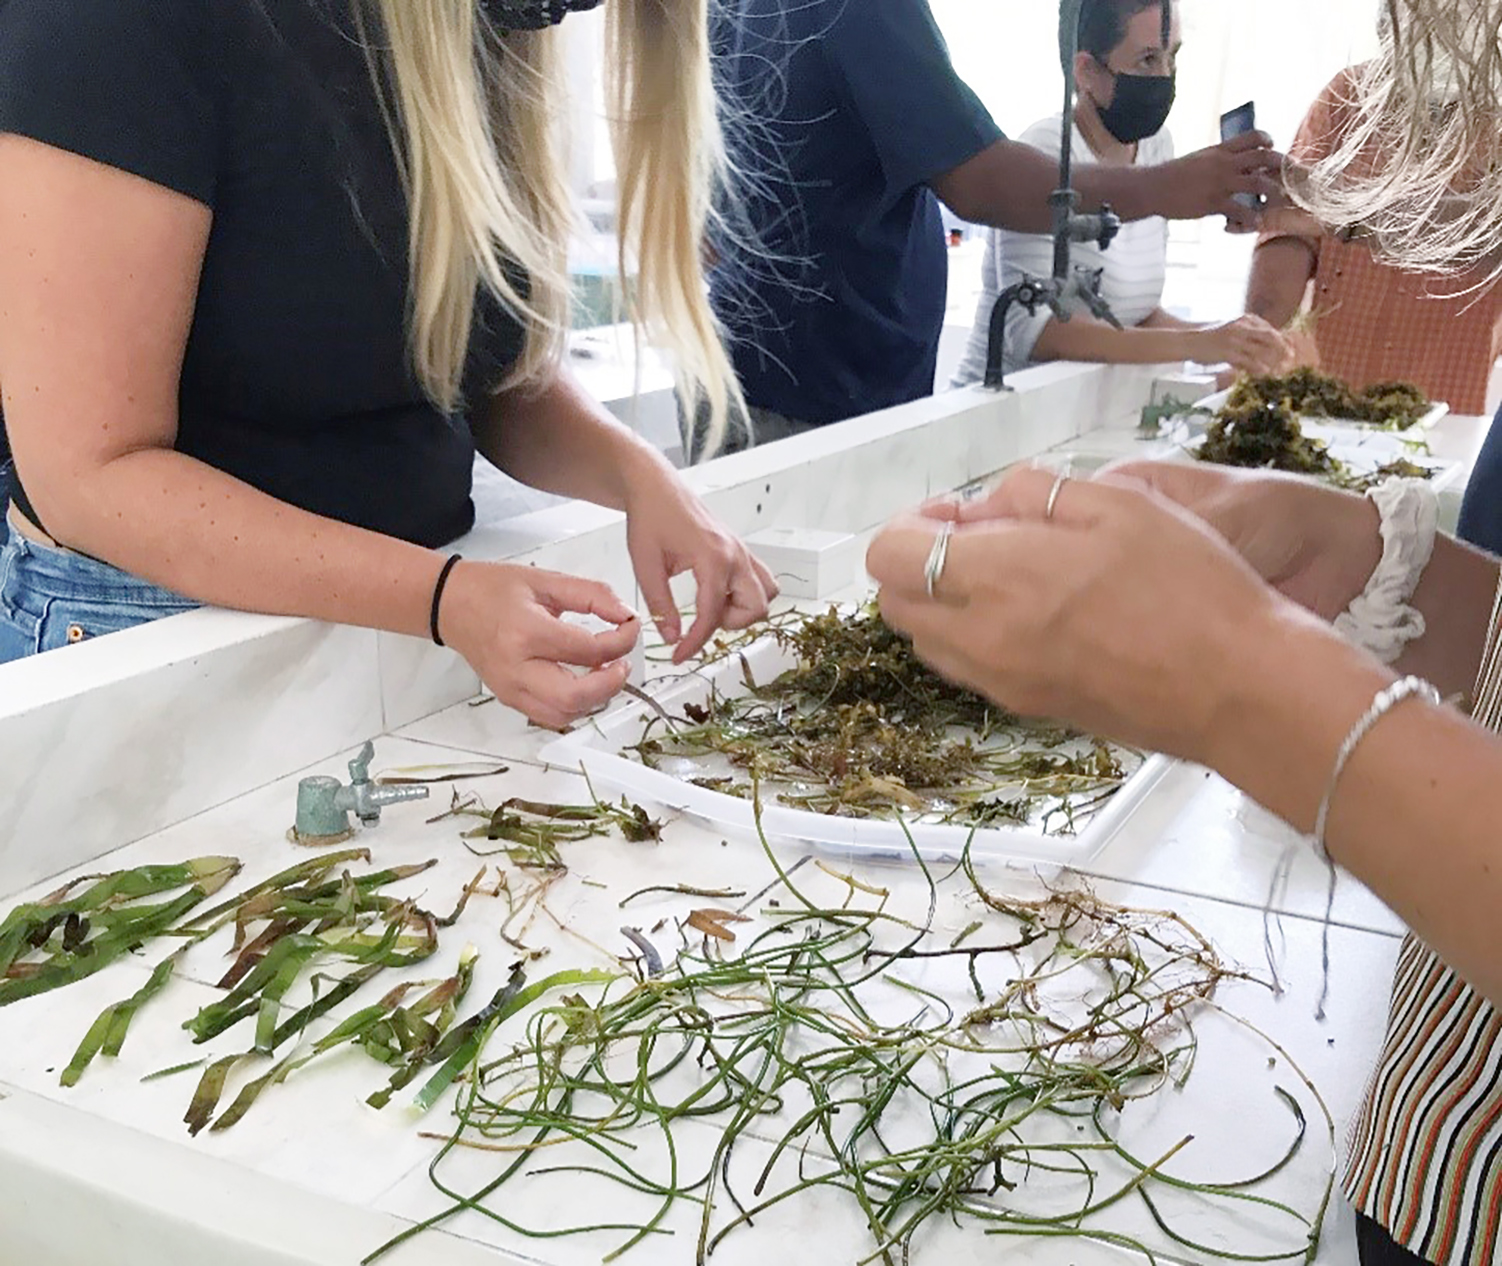 Participants learn how to identify different species of seagrass found in Seychelles waters.